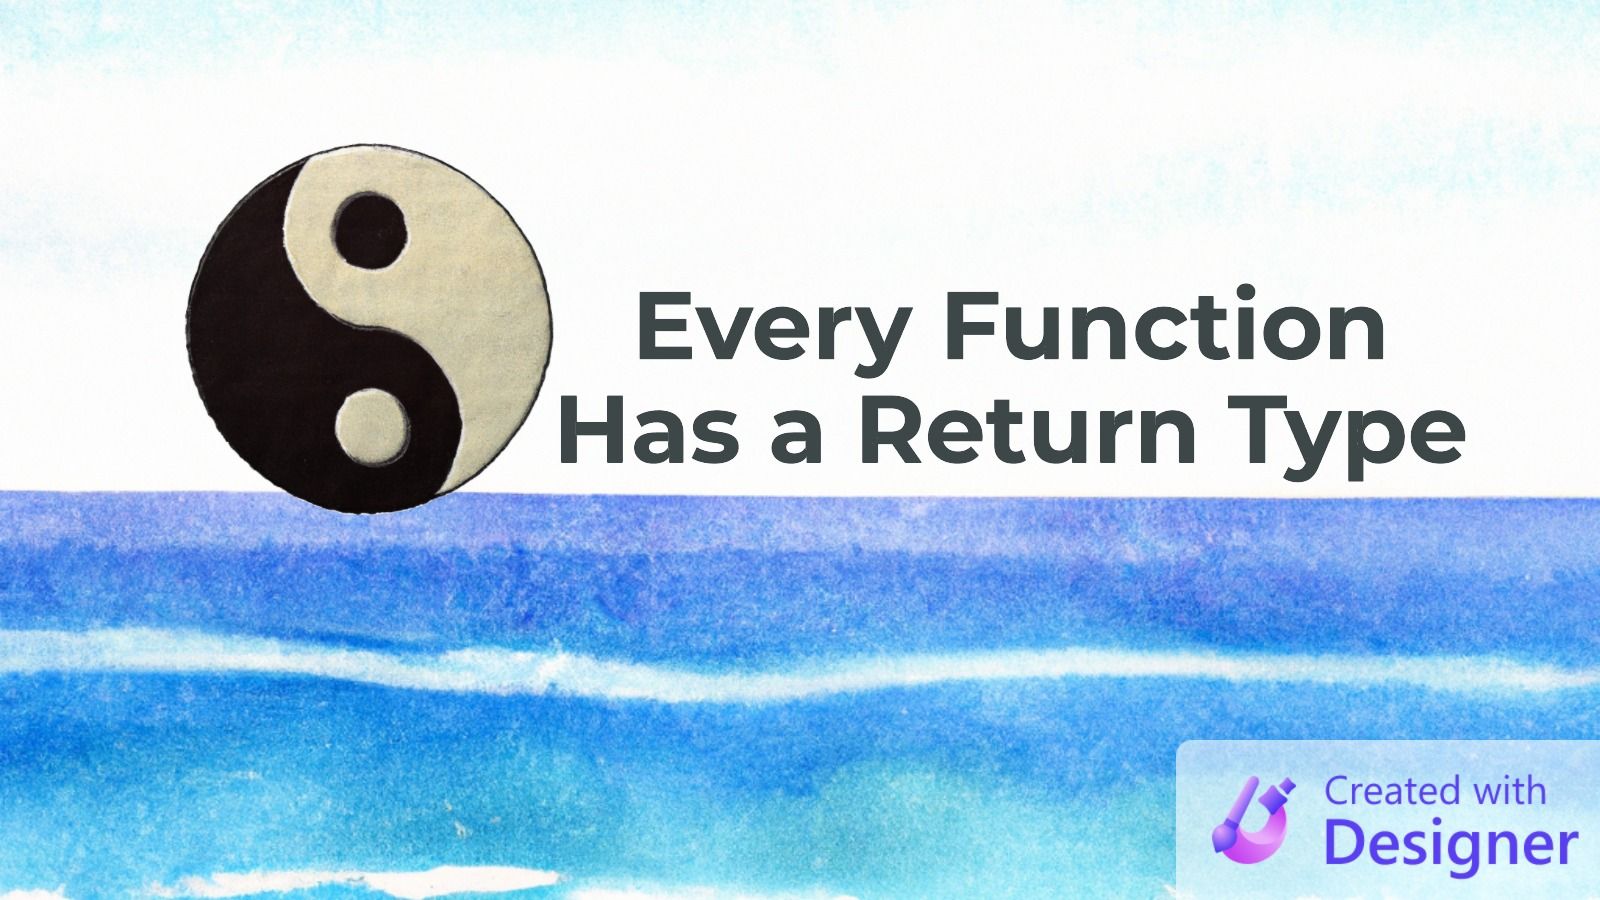 Every Function Has a Return Type